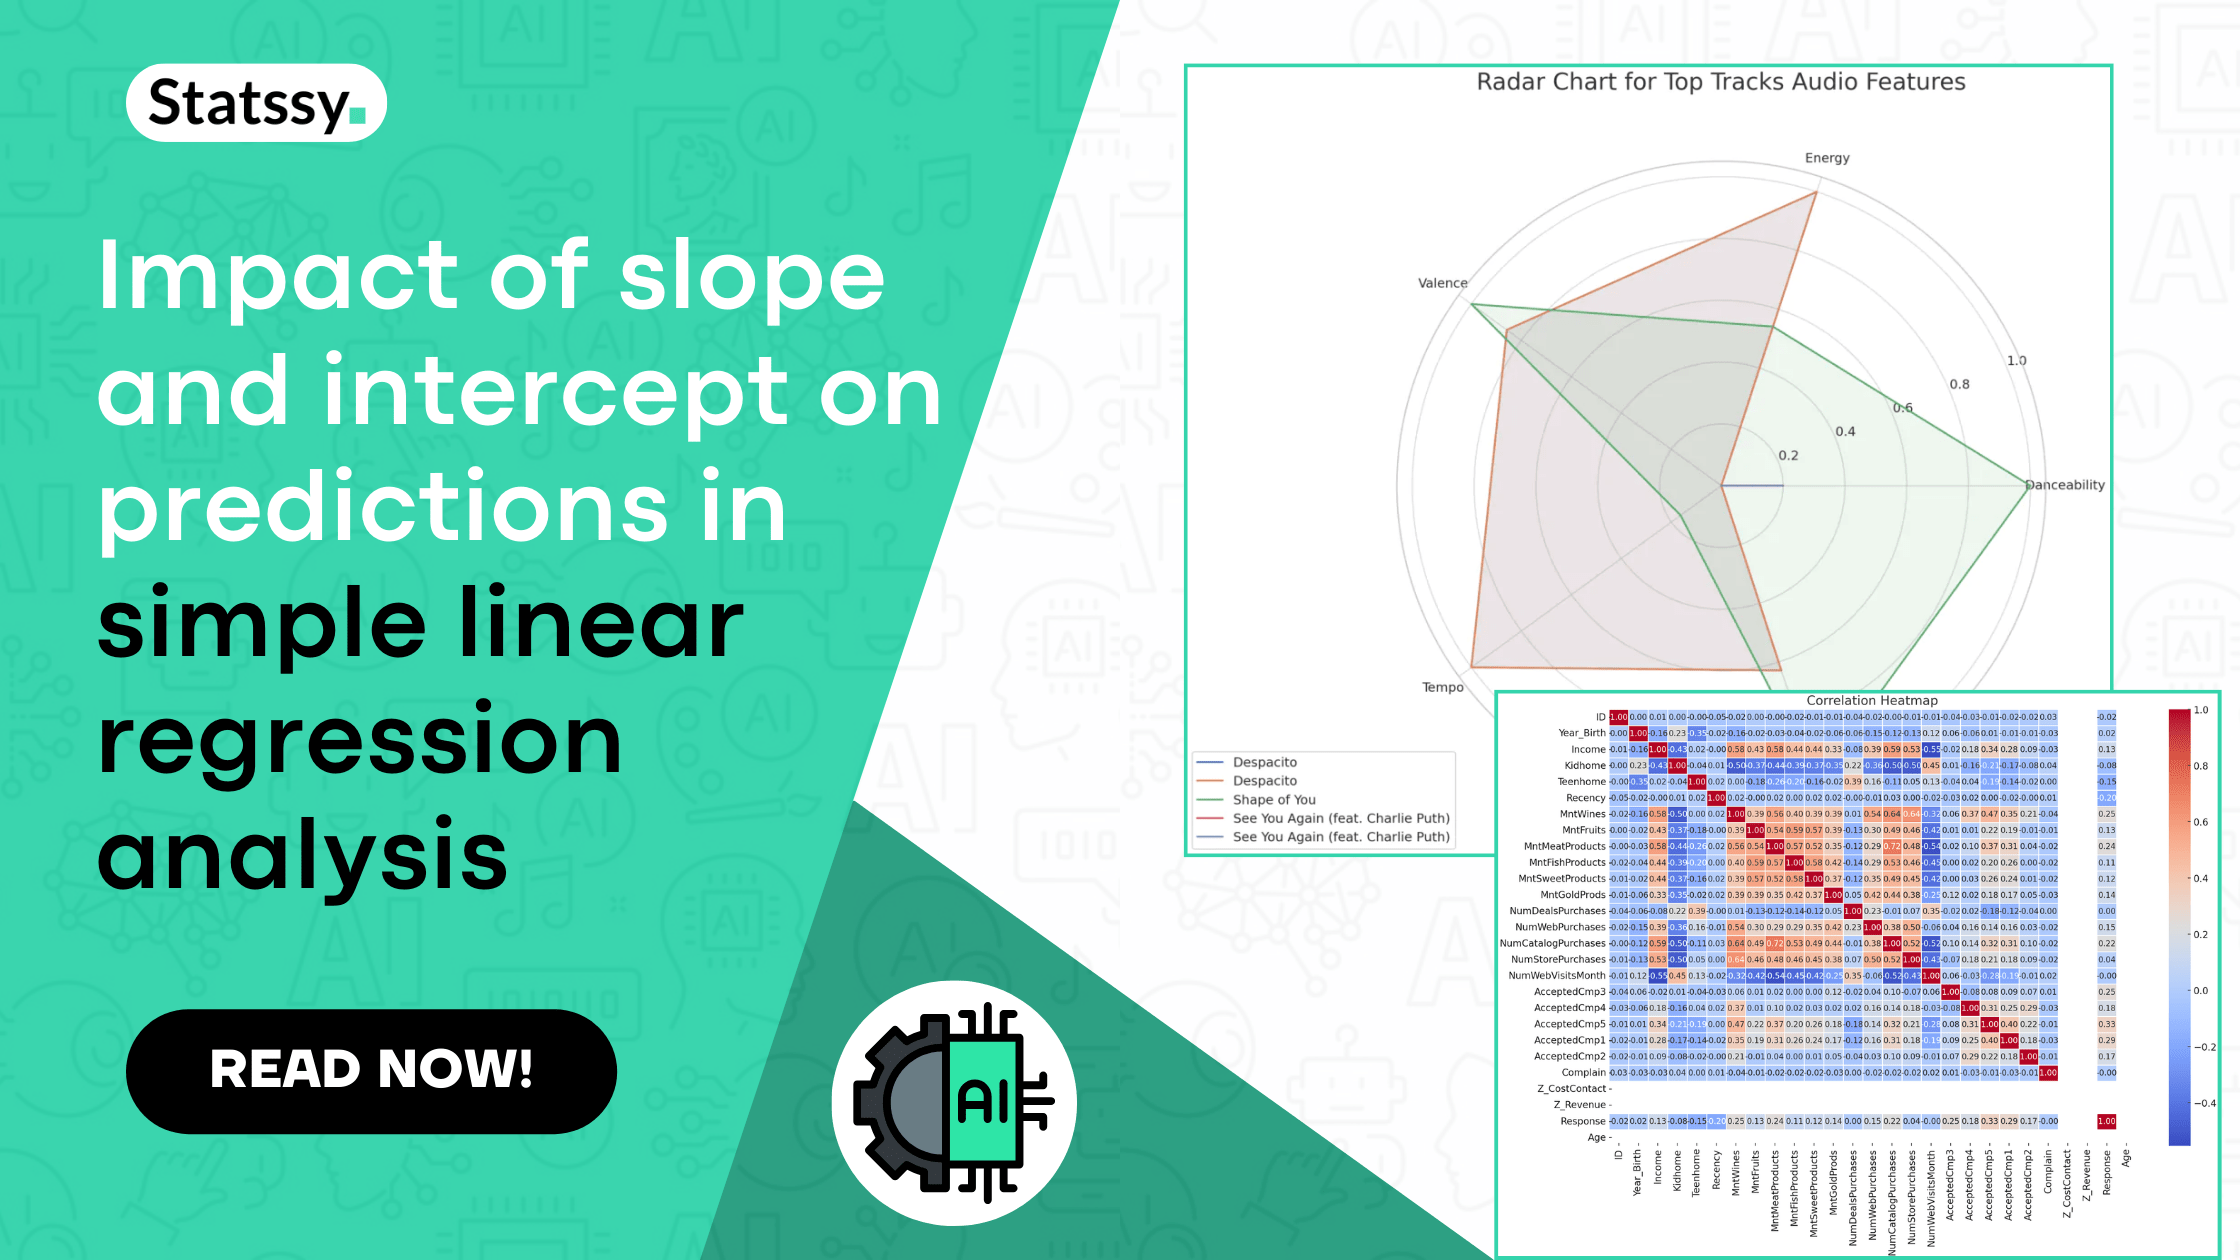 Impact of slope and intercept on predictions in simple linear regression analysis